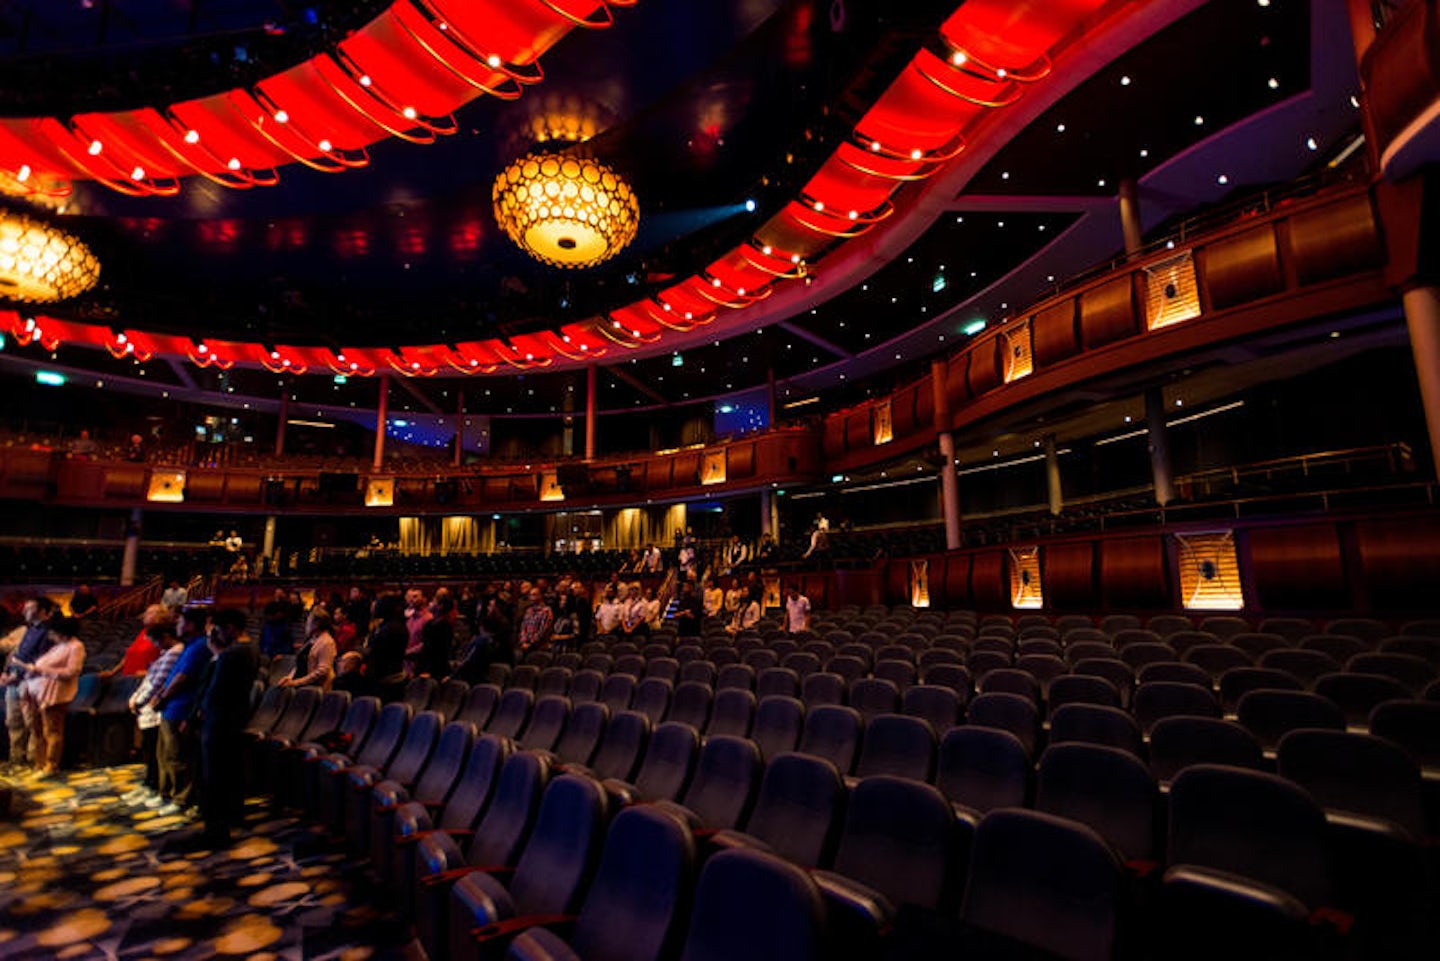 Royal Theater on Symphony of the Seas